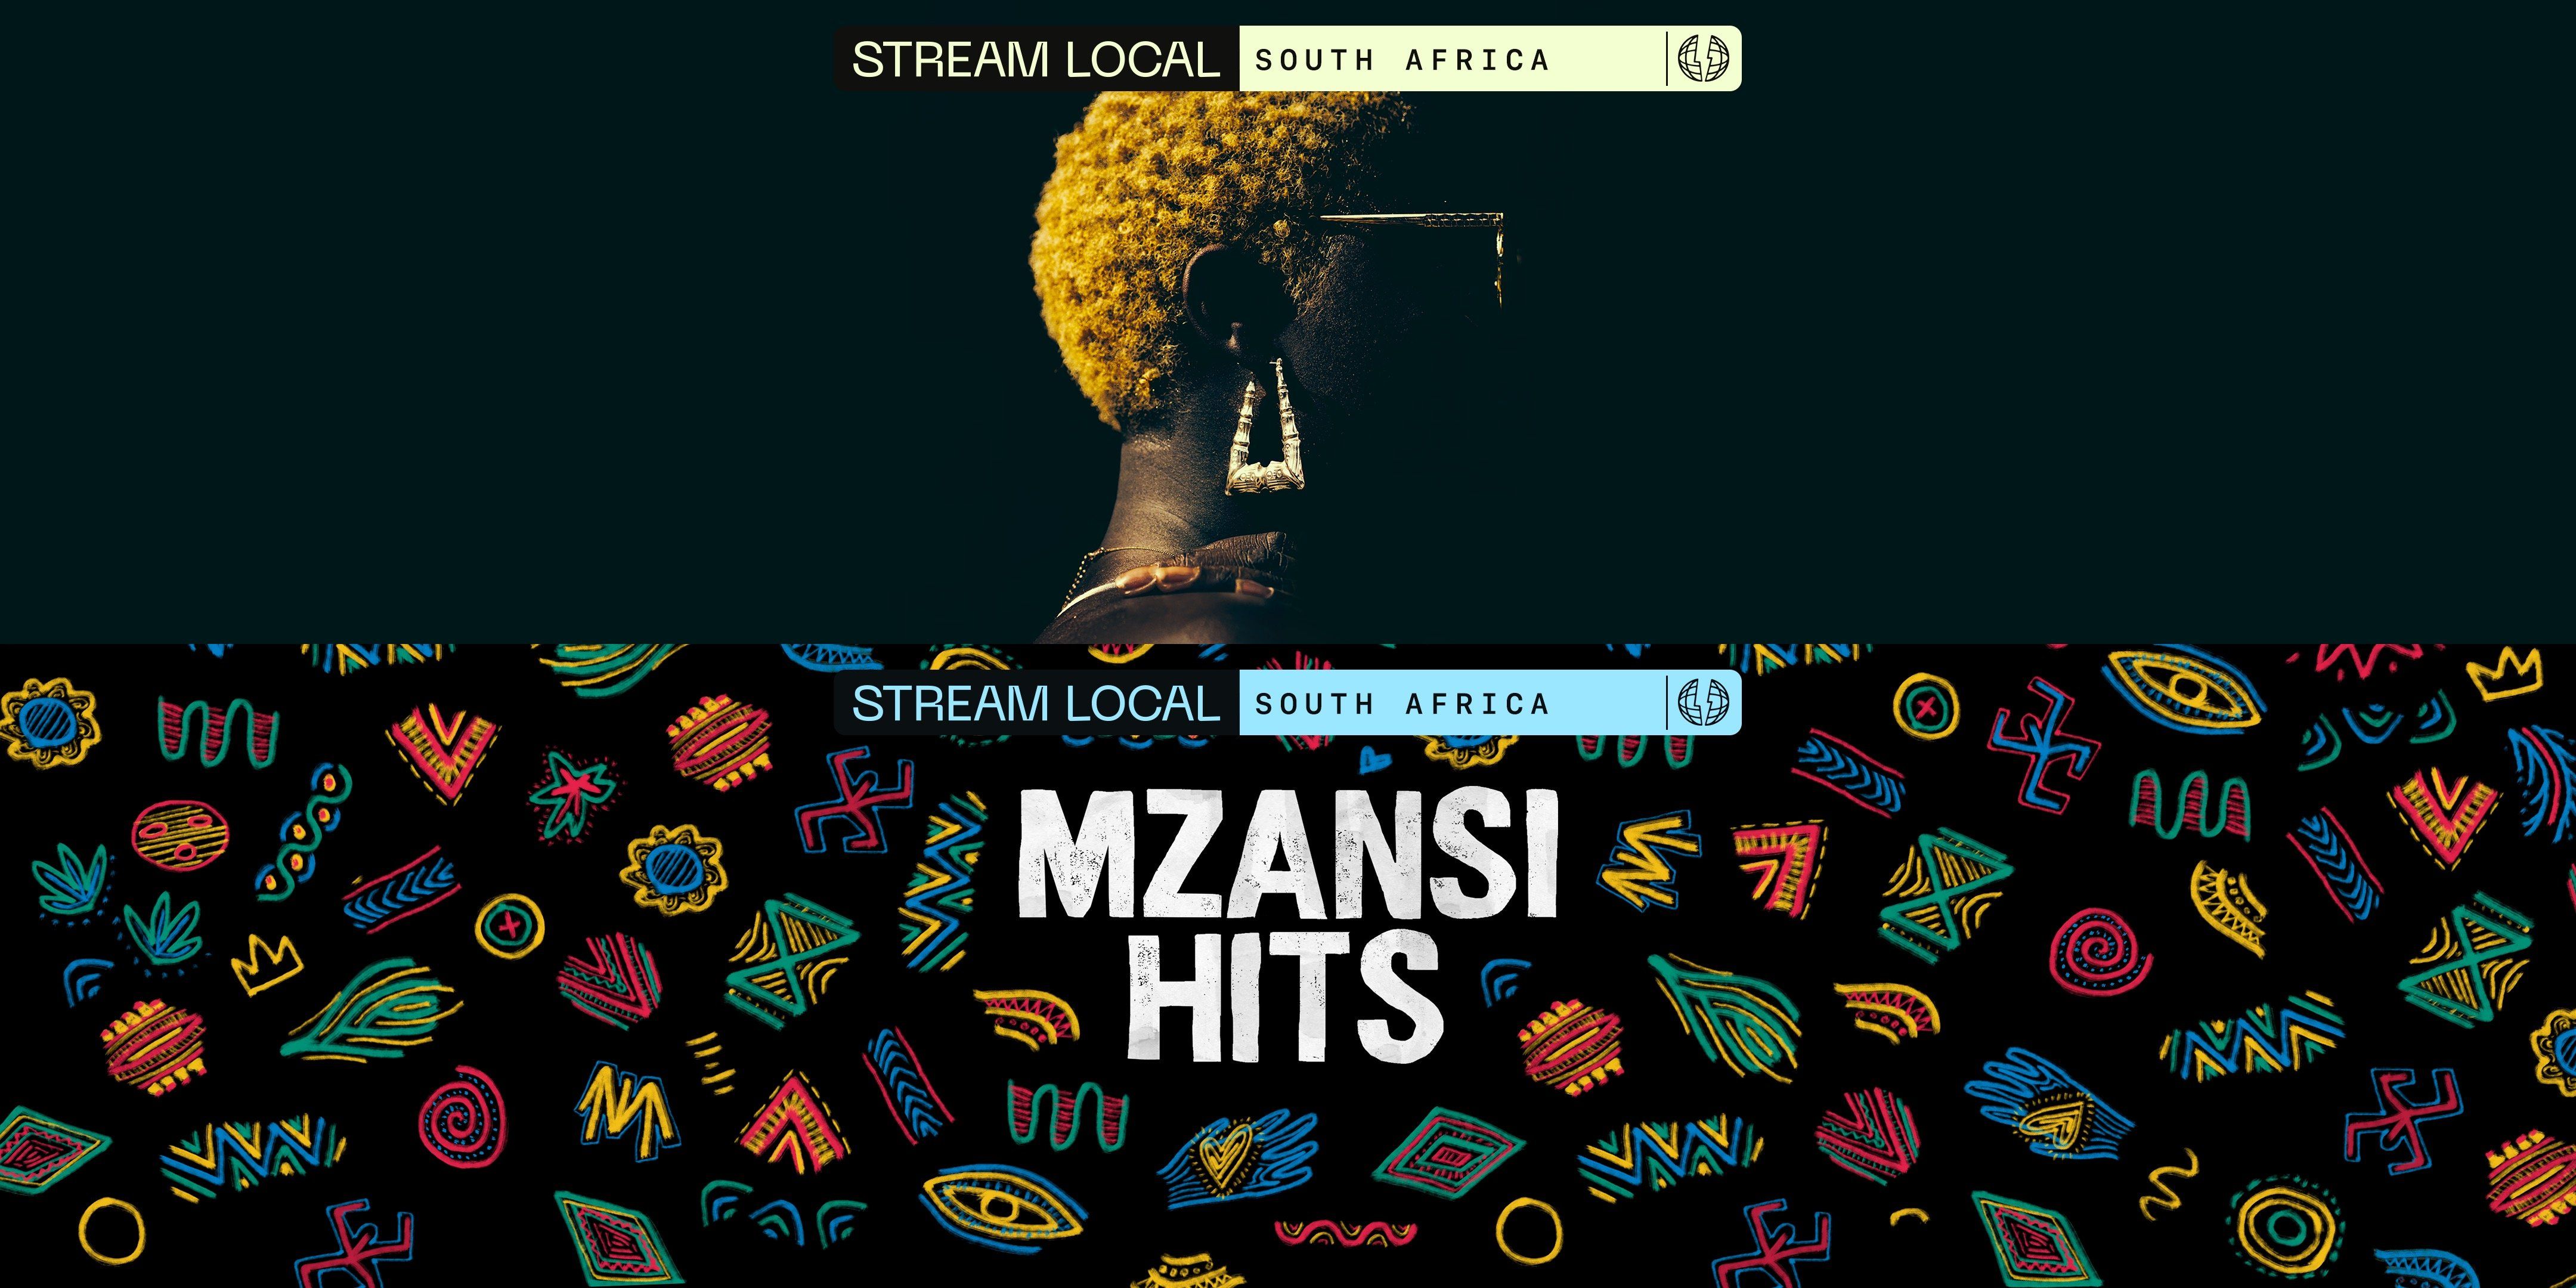 South Africa music